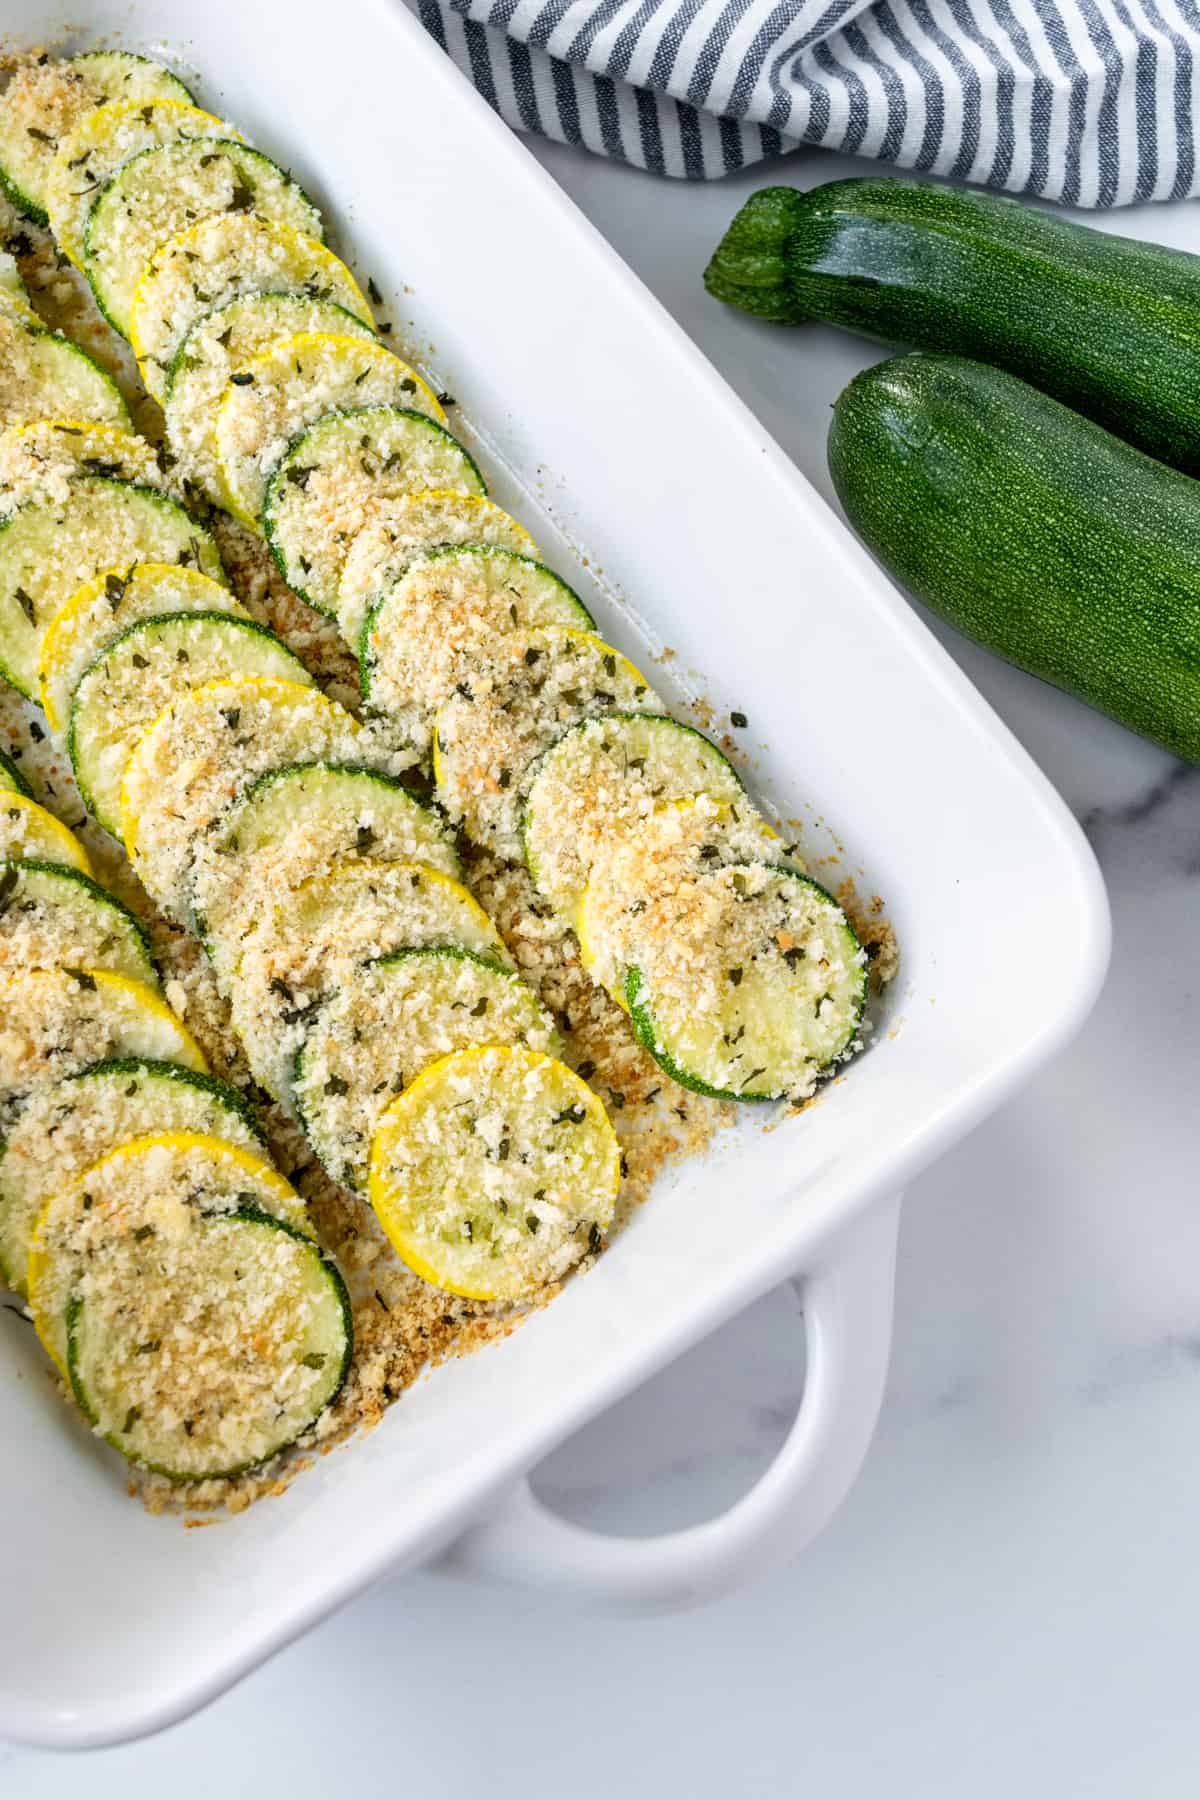 Zucchini and Squash Bake in a casserole dish with fresh zucchini on the table next to it.